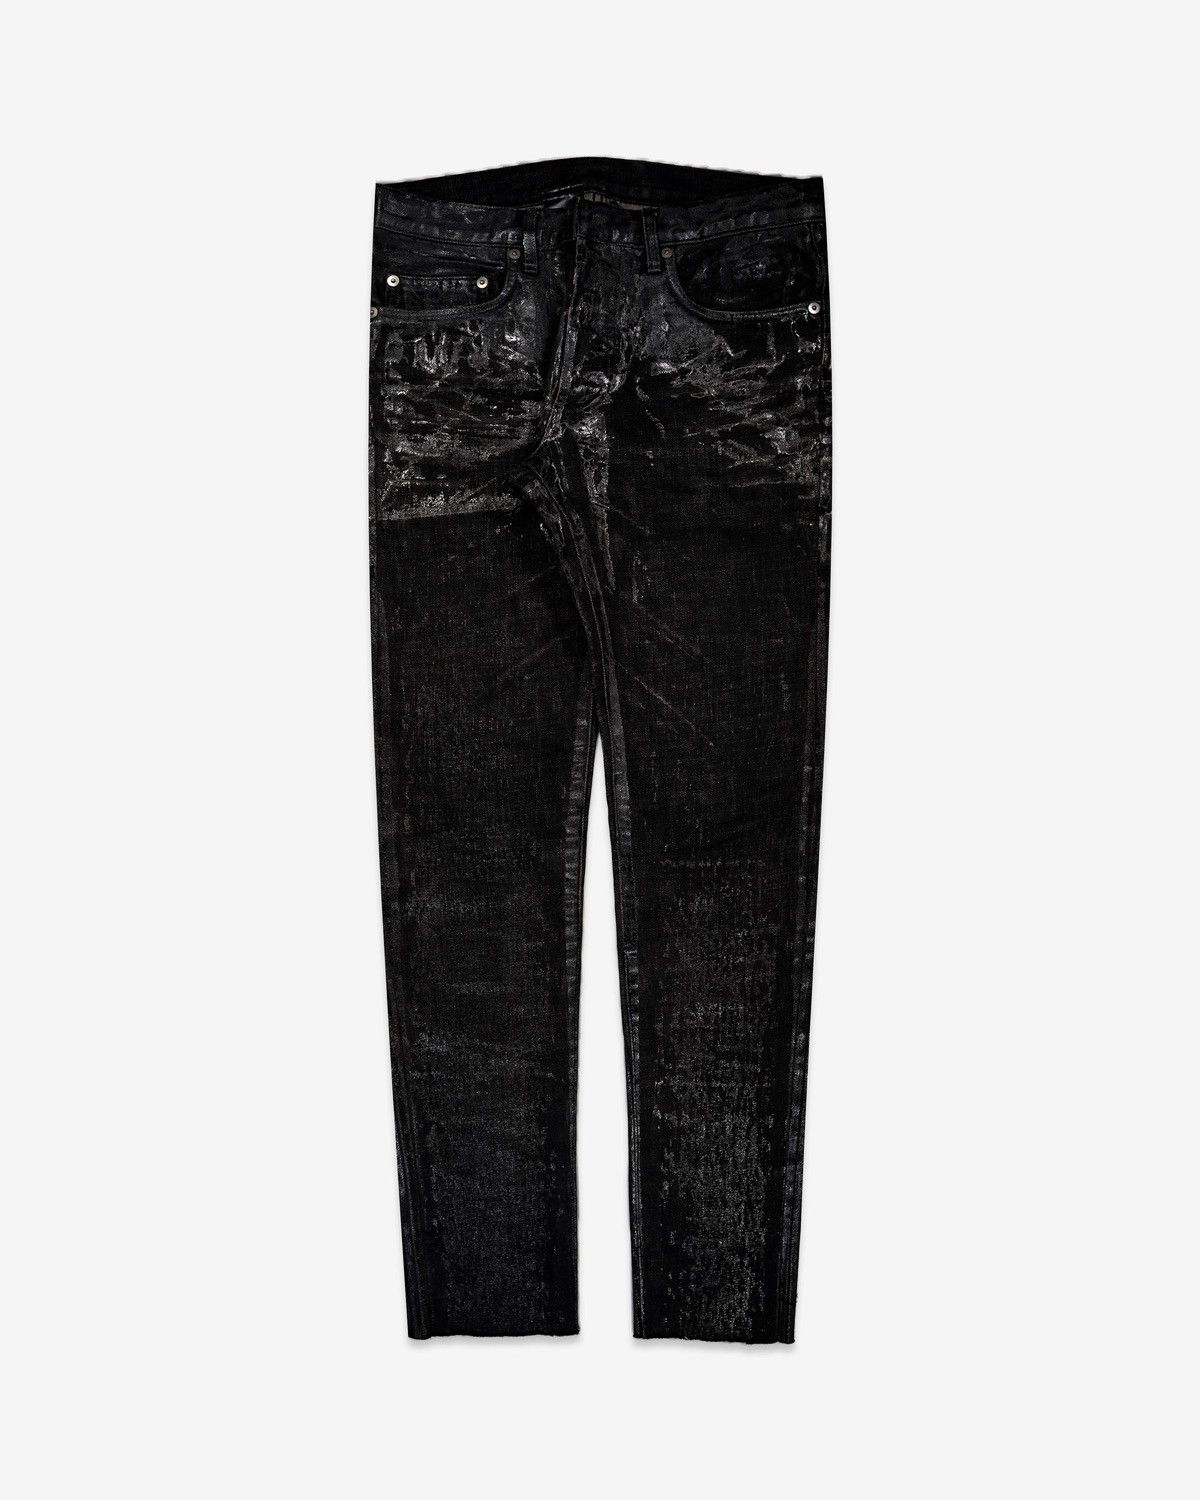 Dior Dior Homme “Luster” Jeans - AW07 | Grailed